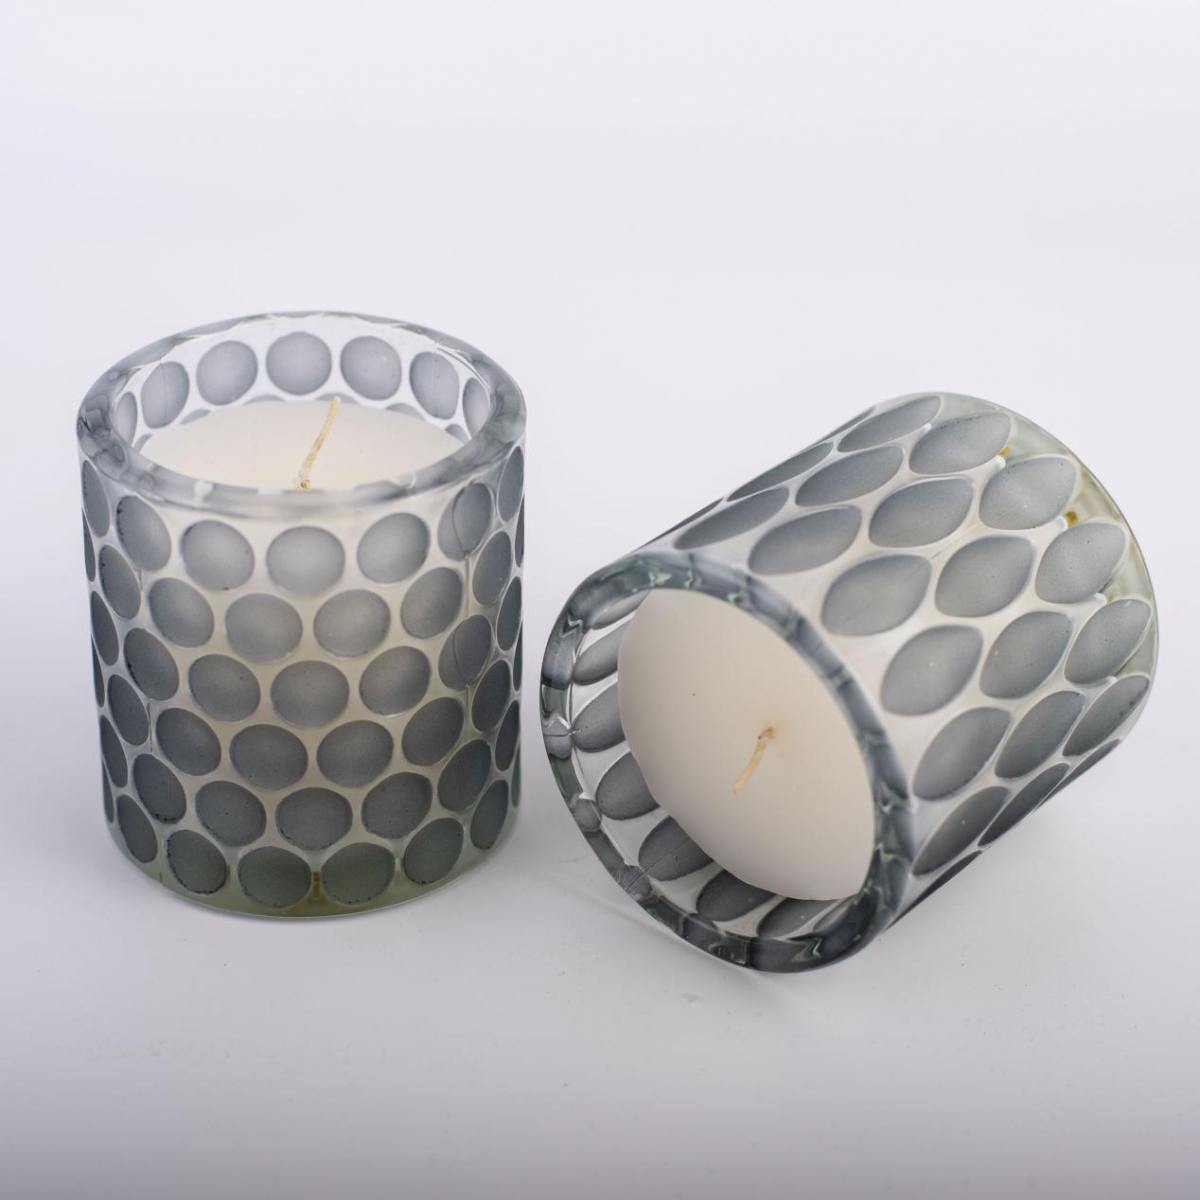 Vegan Candles – Soy Wax ,ECO Friendly Candles , Scented Candles In Glass Jar ,Polishing Geometric Leaf , Aromatherapy Candles ,China Factory ,Price-HOWCANDLE-Candles,Scented Candles,Aromatherapy Candles,Soy Candles,Vegan Candles,Jar Candles,Pillar Candles,Candle Gift Sets,Essential Oils,Reed Diffuser,Candle Holder,